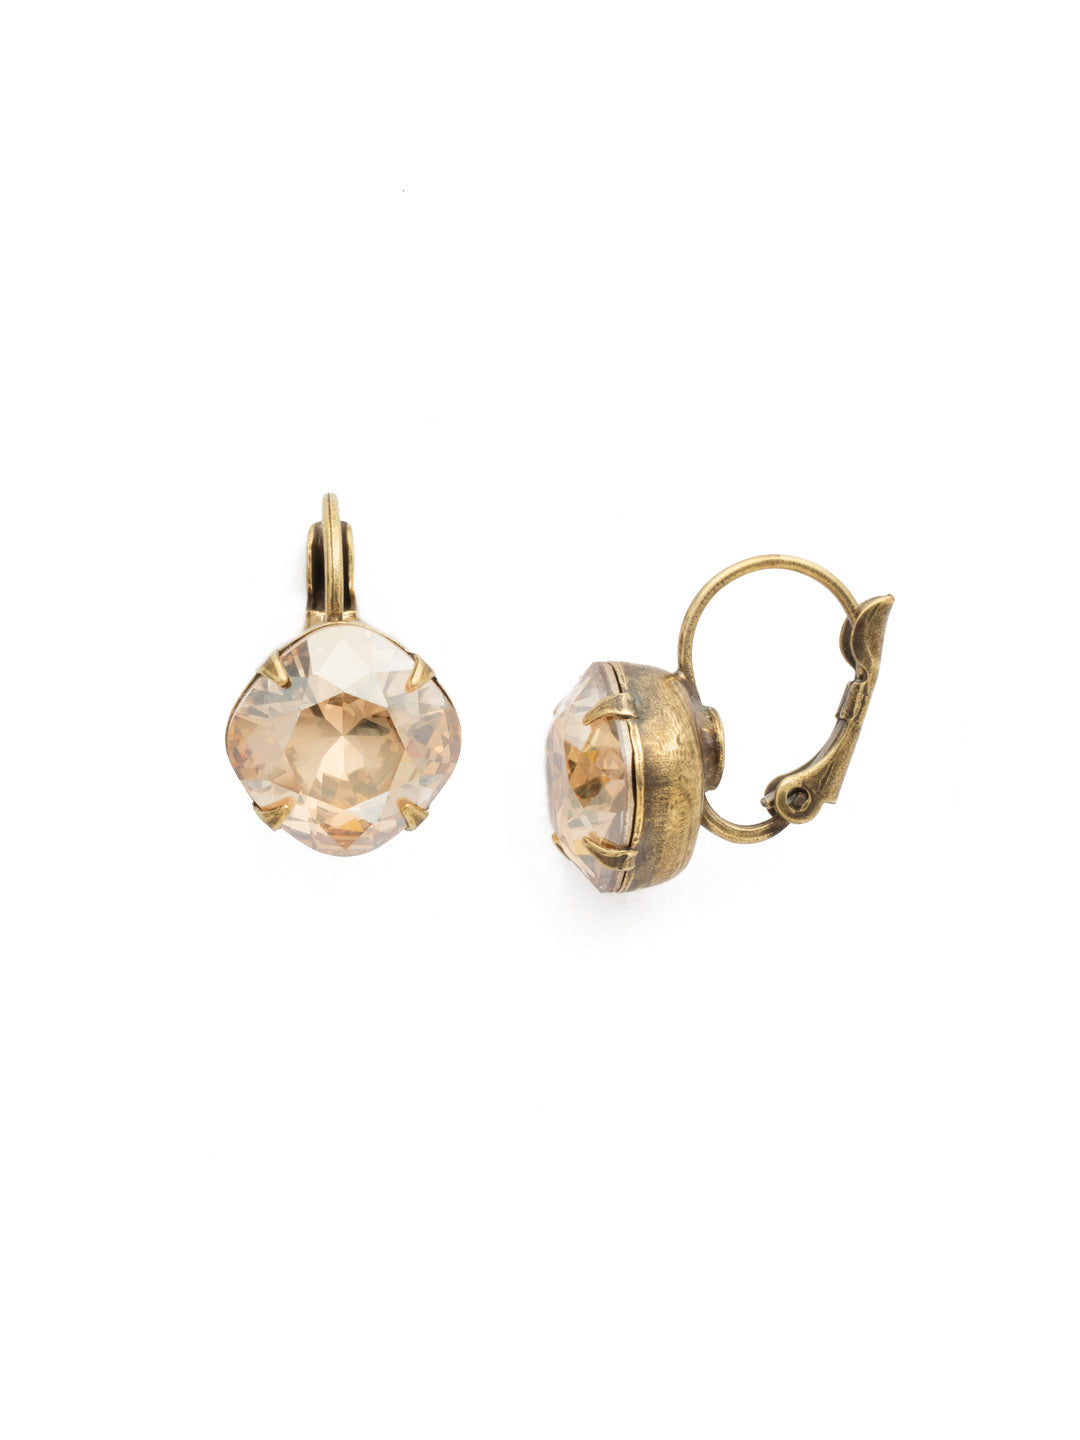 Cushion-Cut Dangle Earrings - EDL12AGDCH - A simple, yet stunning earring featuring a cushion cut crystal that will never go out of style. From Sorrelli's Dark Champagne collection in our Antique Gold-tone finish.